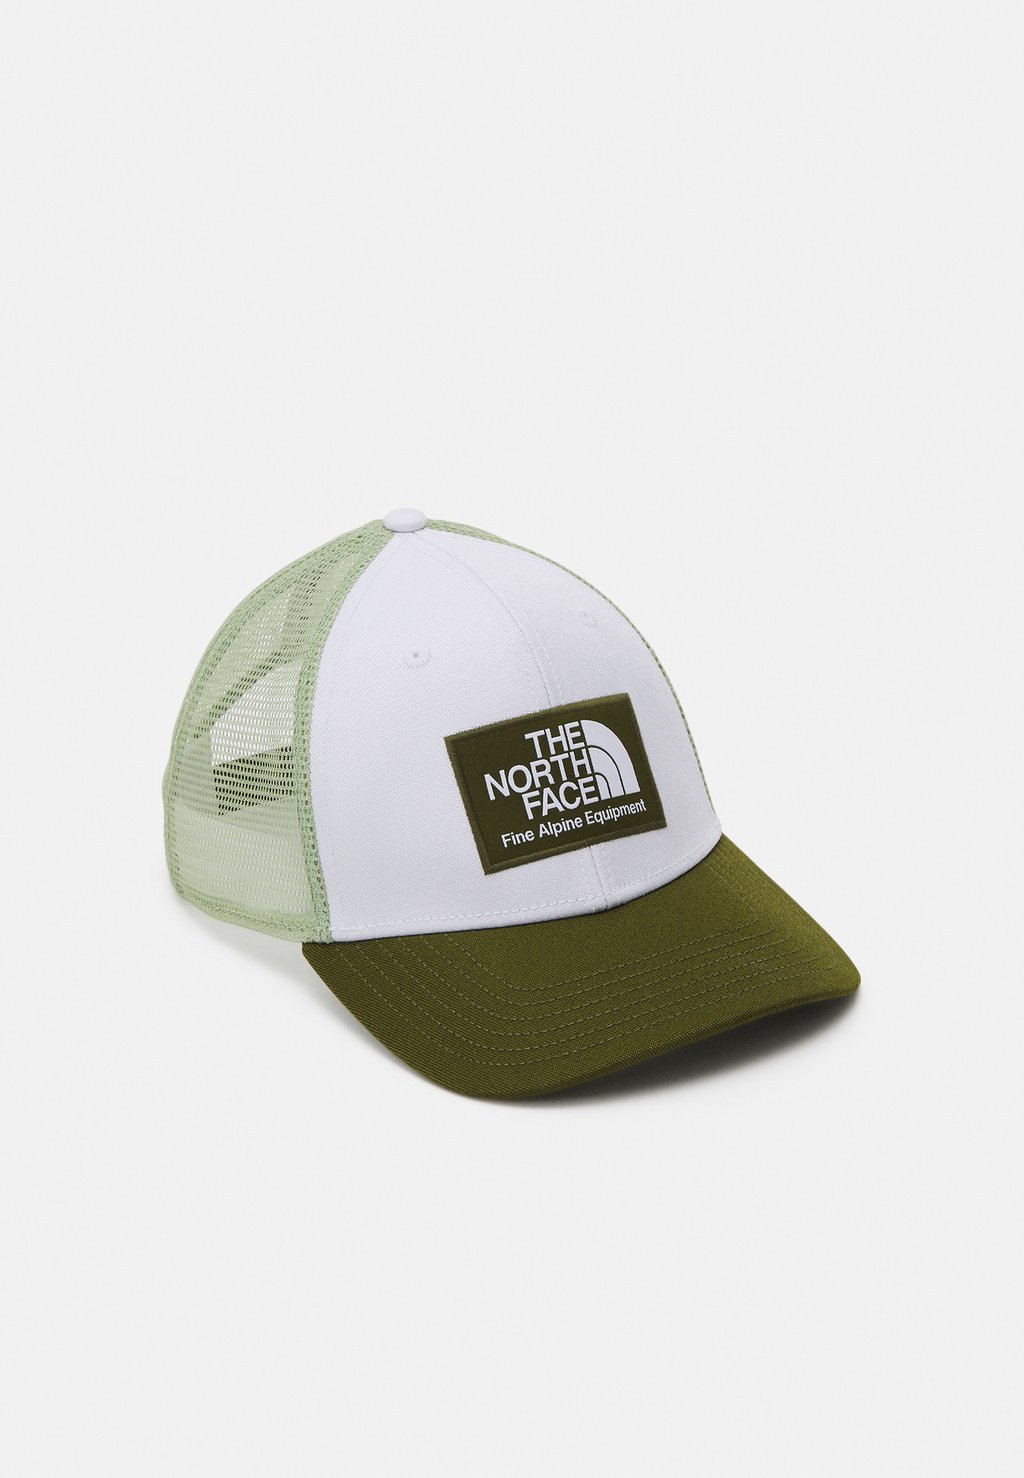 Кепка Deep Fit Mudder Trucker Unisex The North Face, цвет forest olive/misty sage кепка the north face deep fit mudder trucker цвет utility brown khaki stone